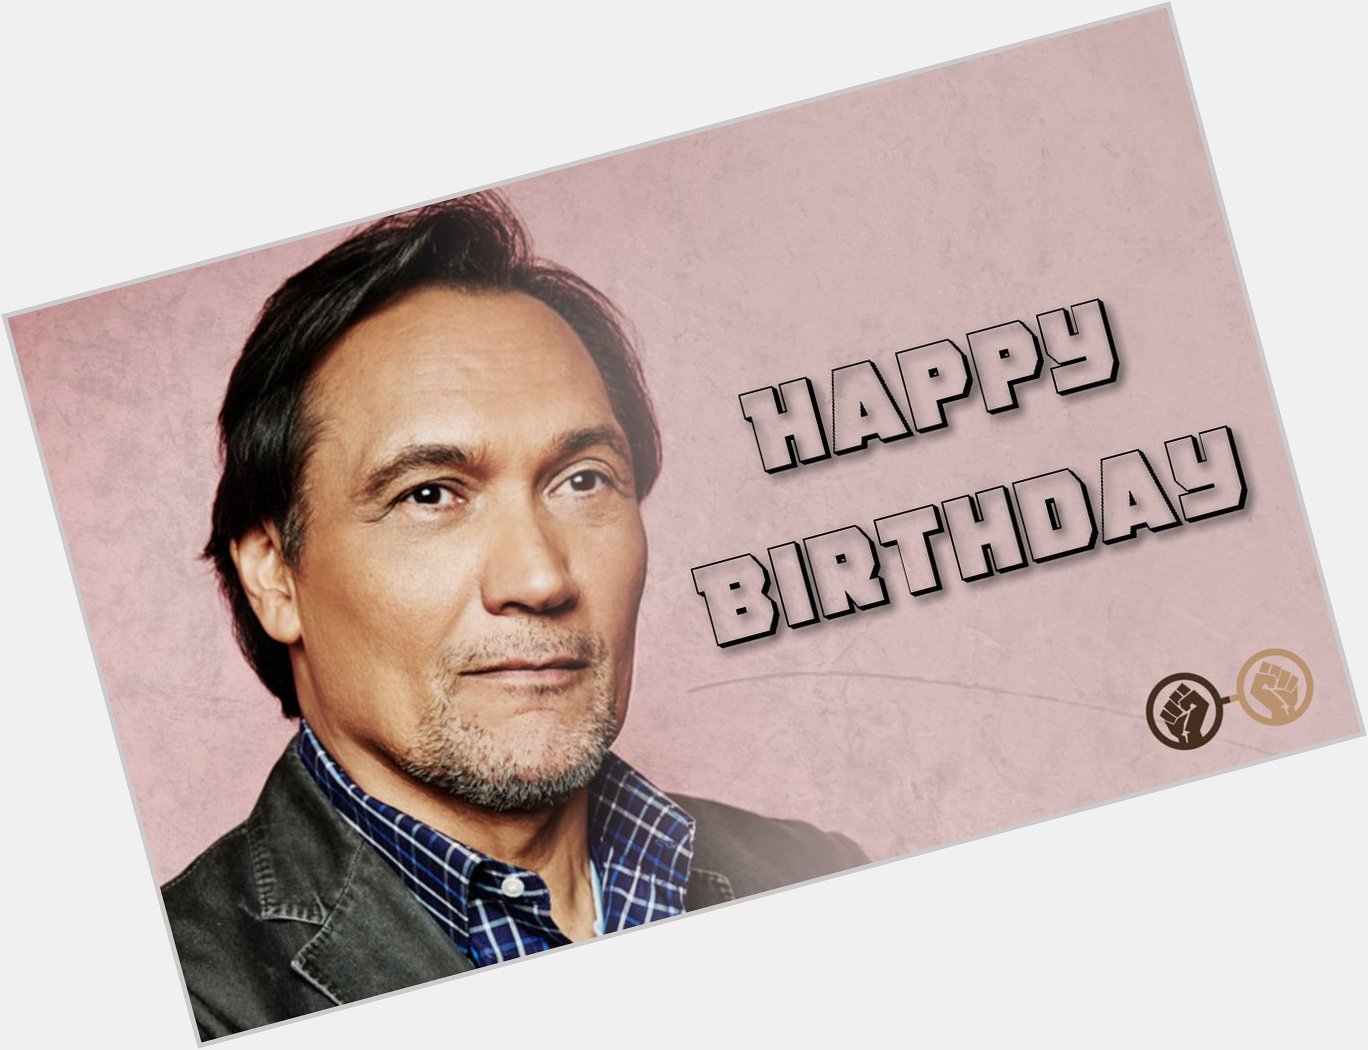 Wishing Jimmy Smits a very happy birthday! The legendary actor turns 63 today! 